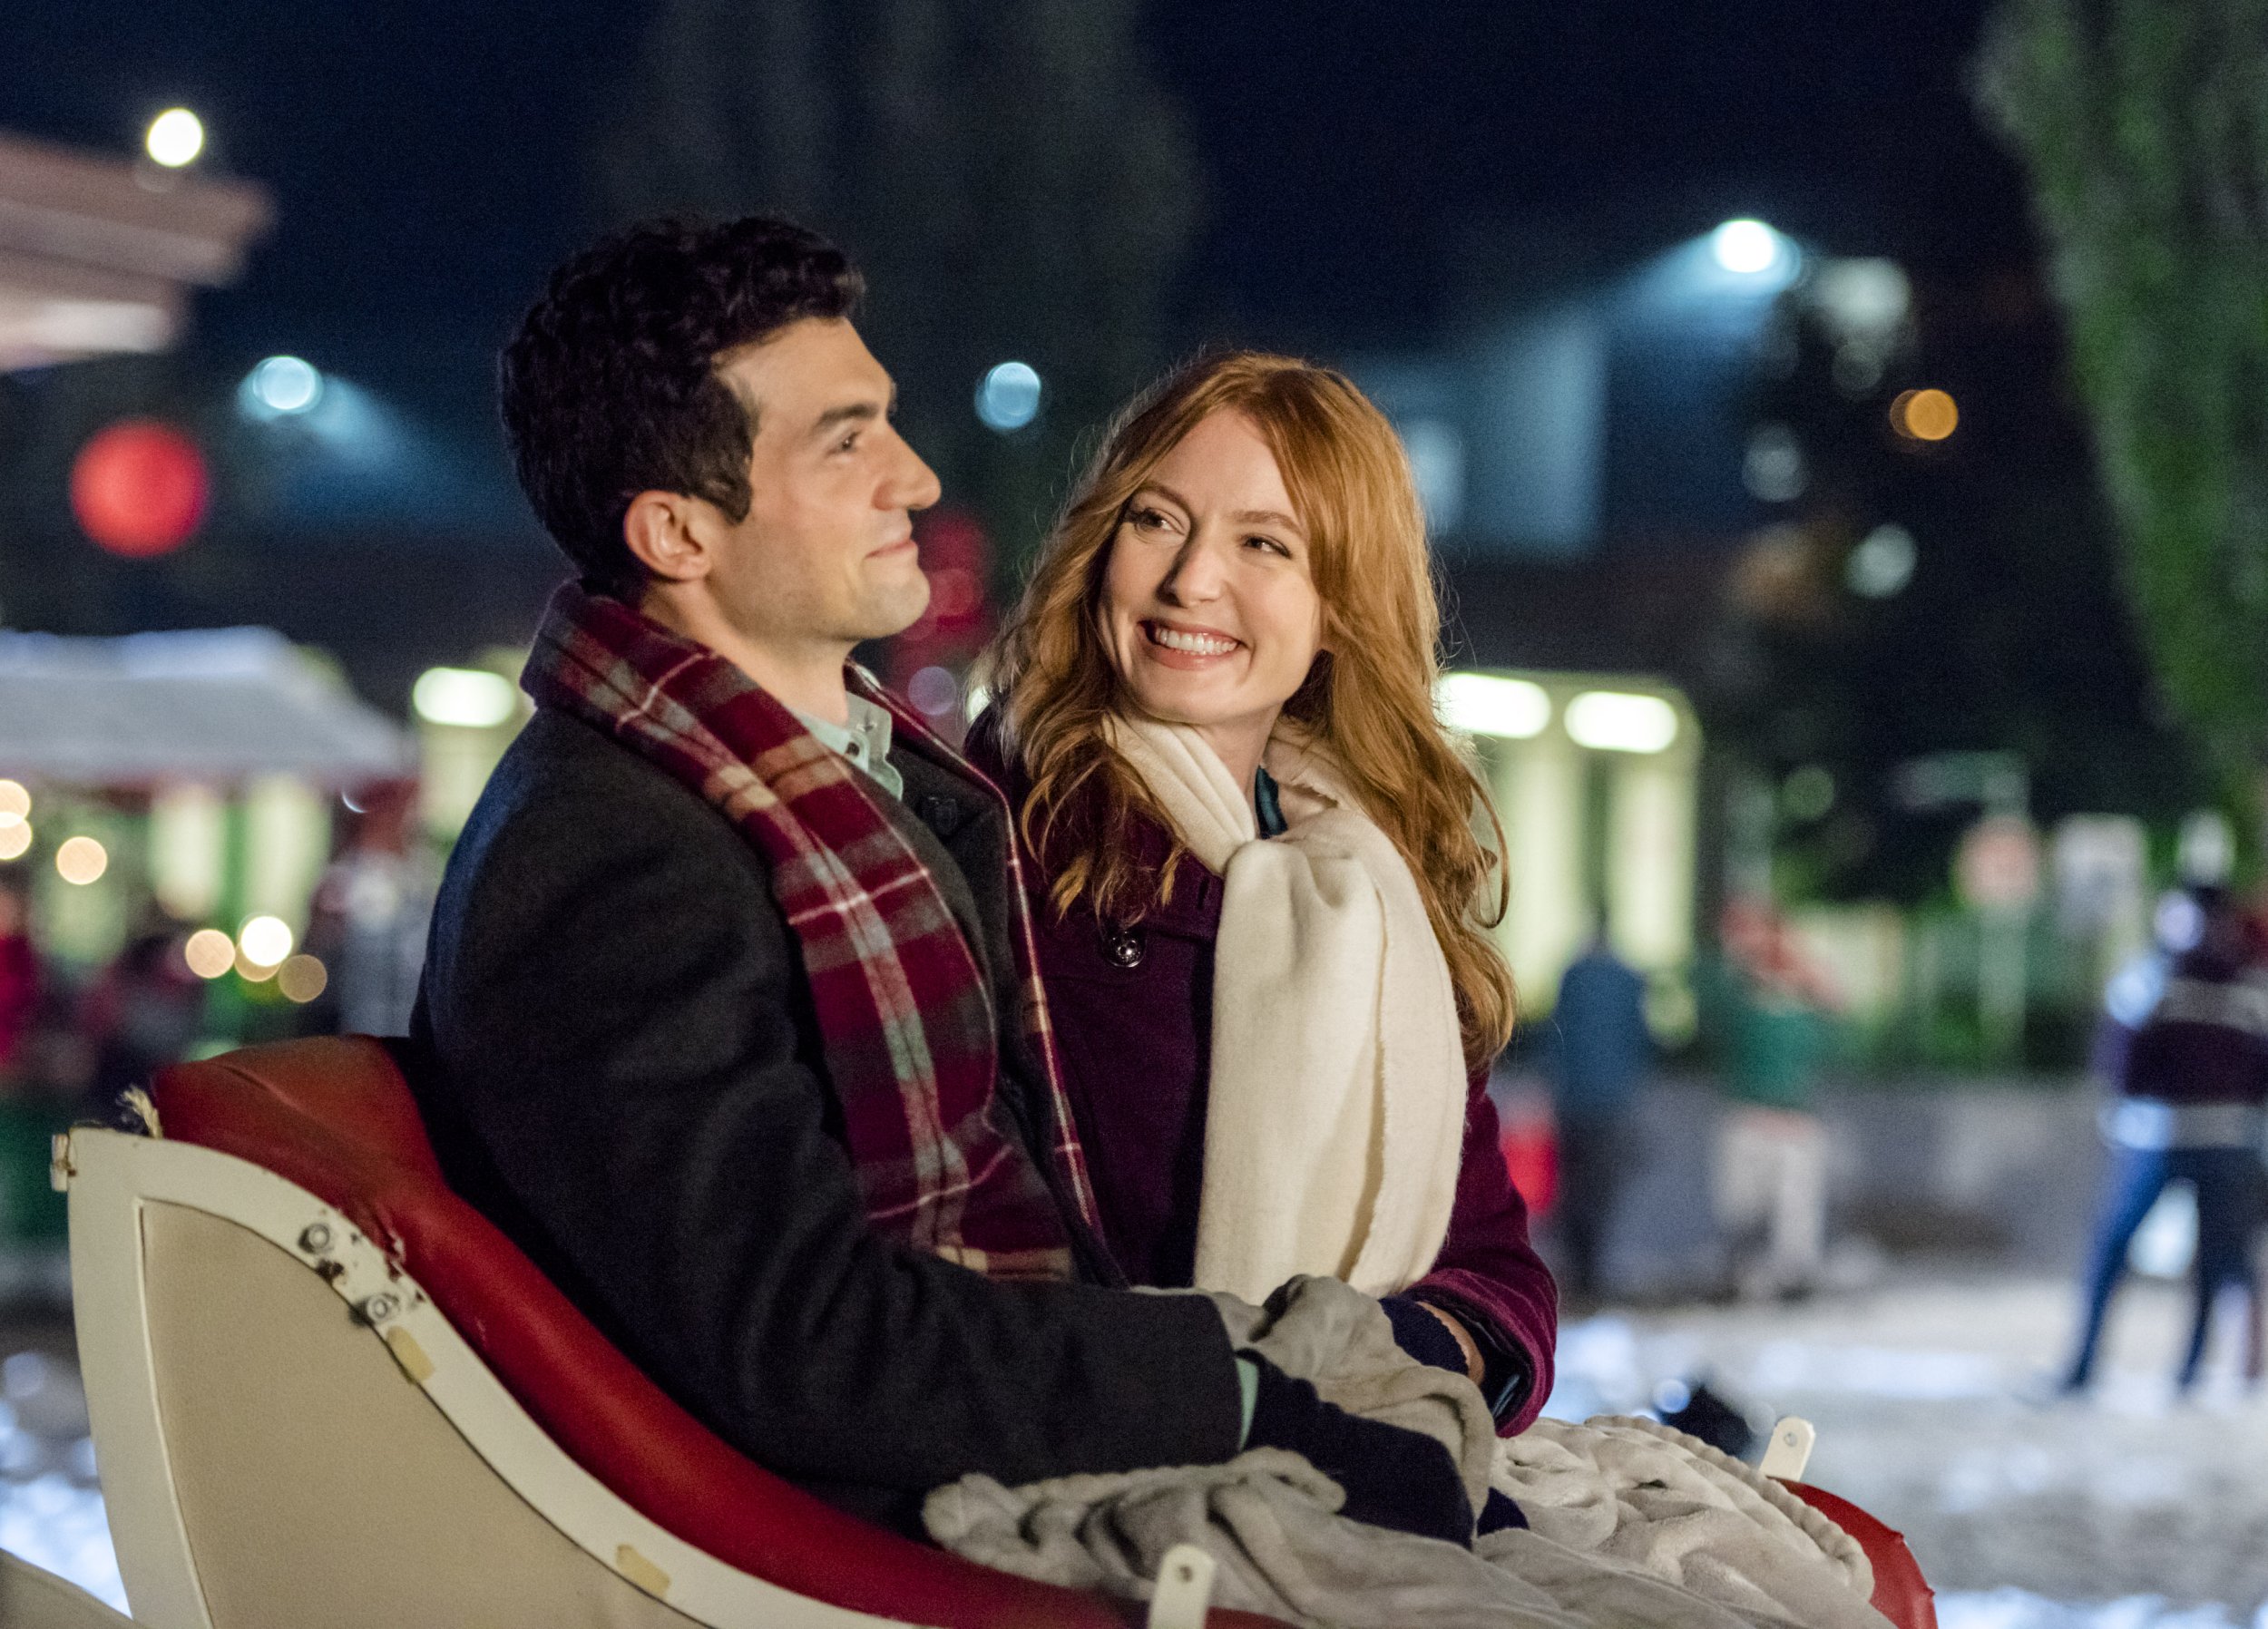 Over 30 Hallmark Christmas Movies Airing Thanksgiving Weekend, See Full